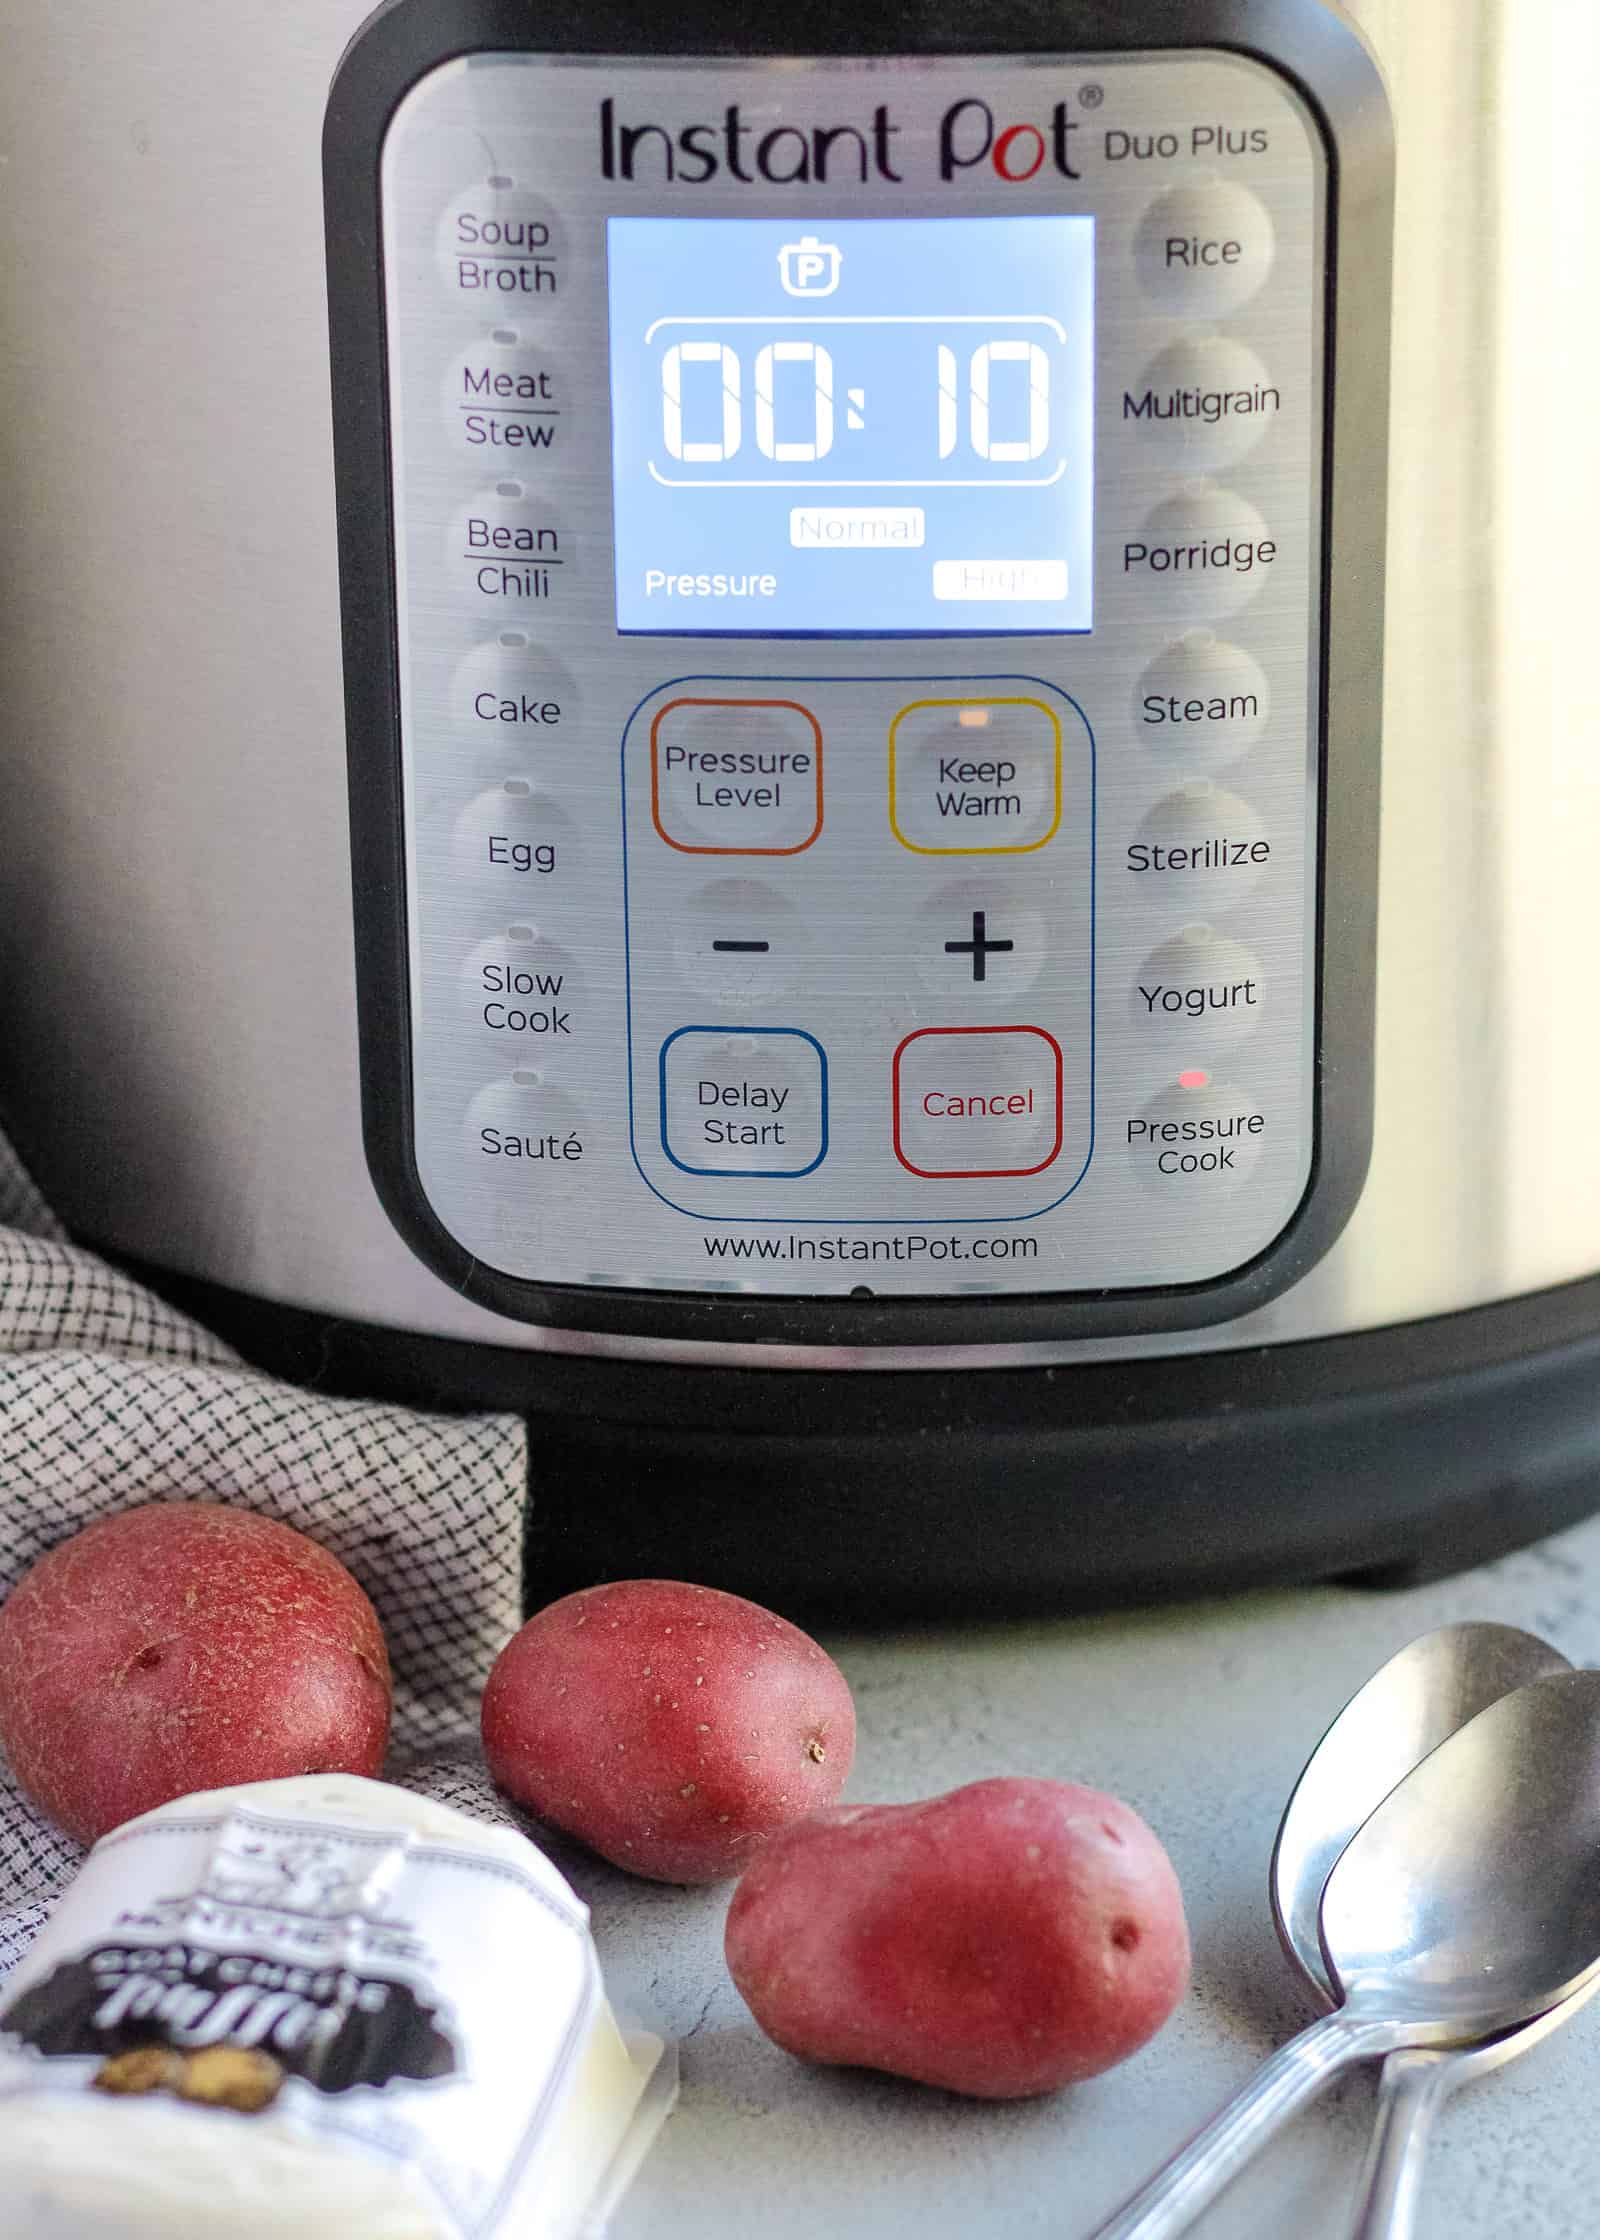 View of the display panel of an Instant Pot with the correct settings for cooking truffle goat cheese mashed potatoes